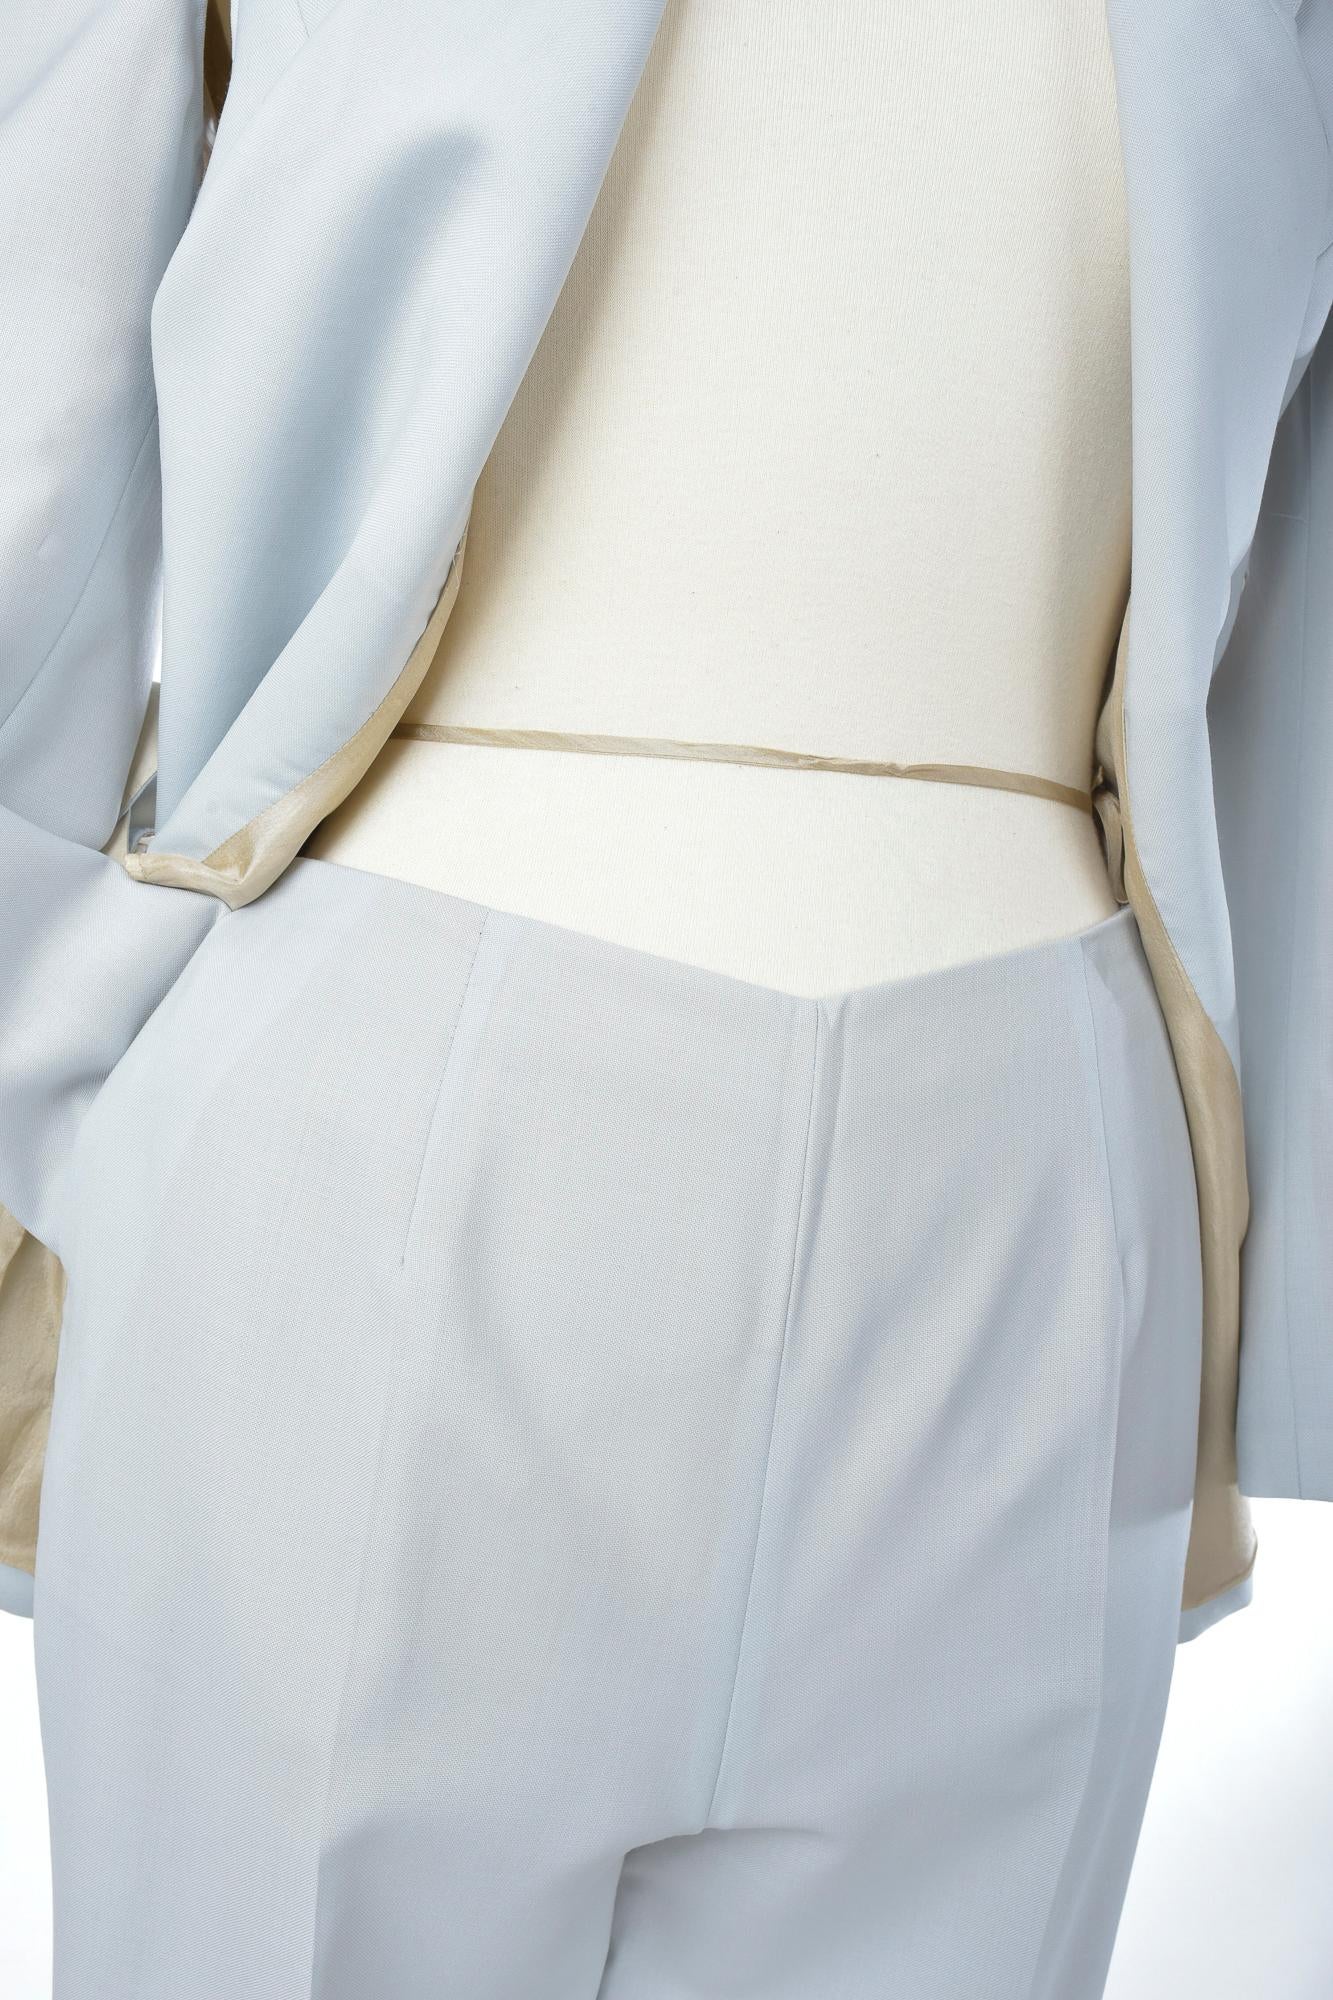 An Ice blue Tuxedo Pant Suit by Gianfranco Ferre - Italy Circa 1995 - 2000 For Sale 8